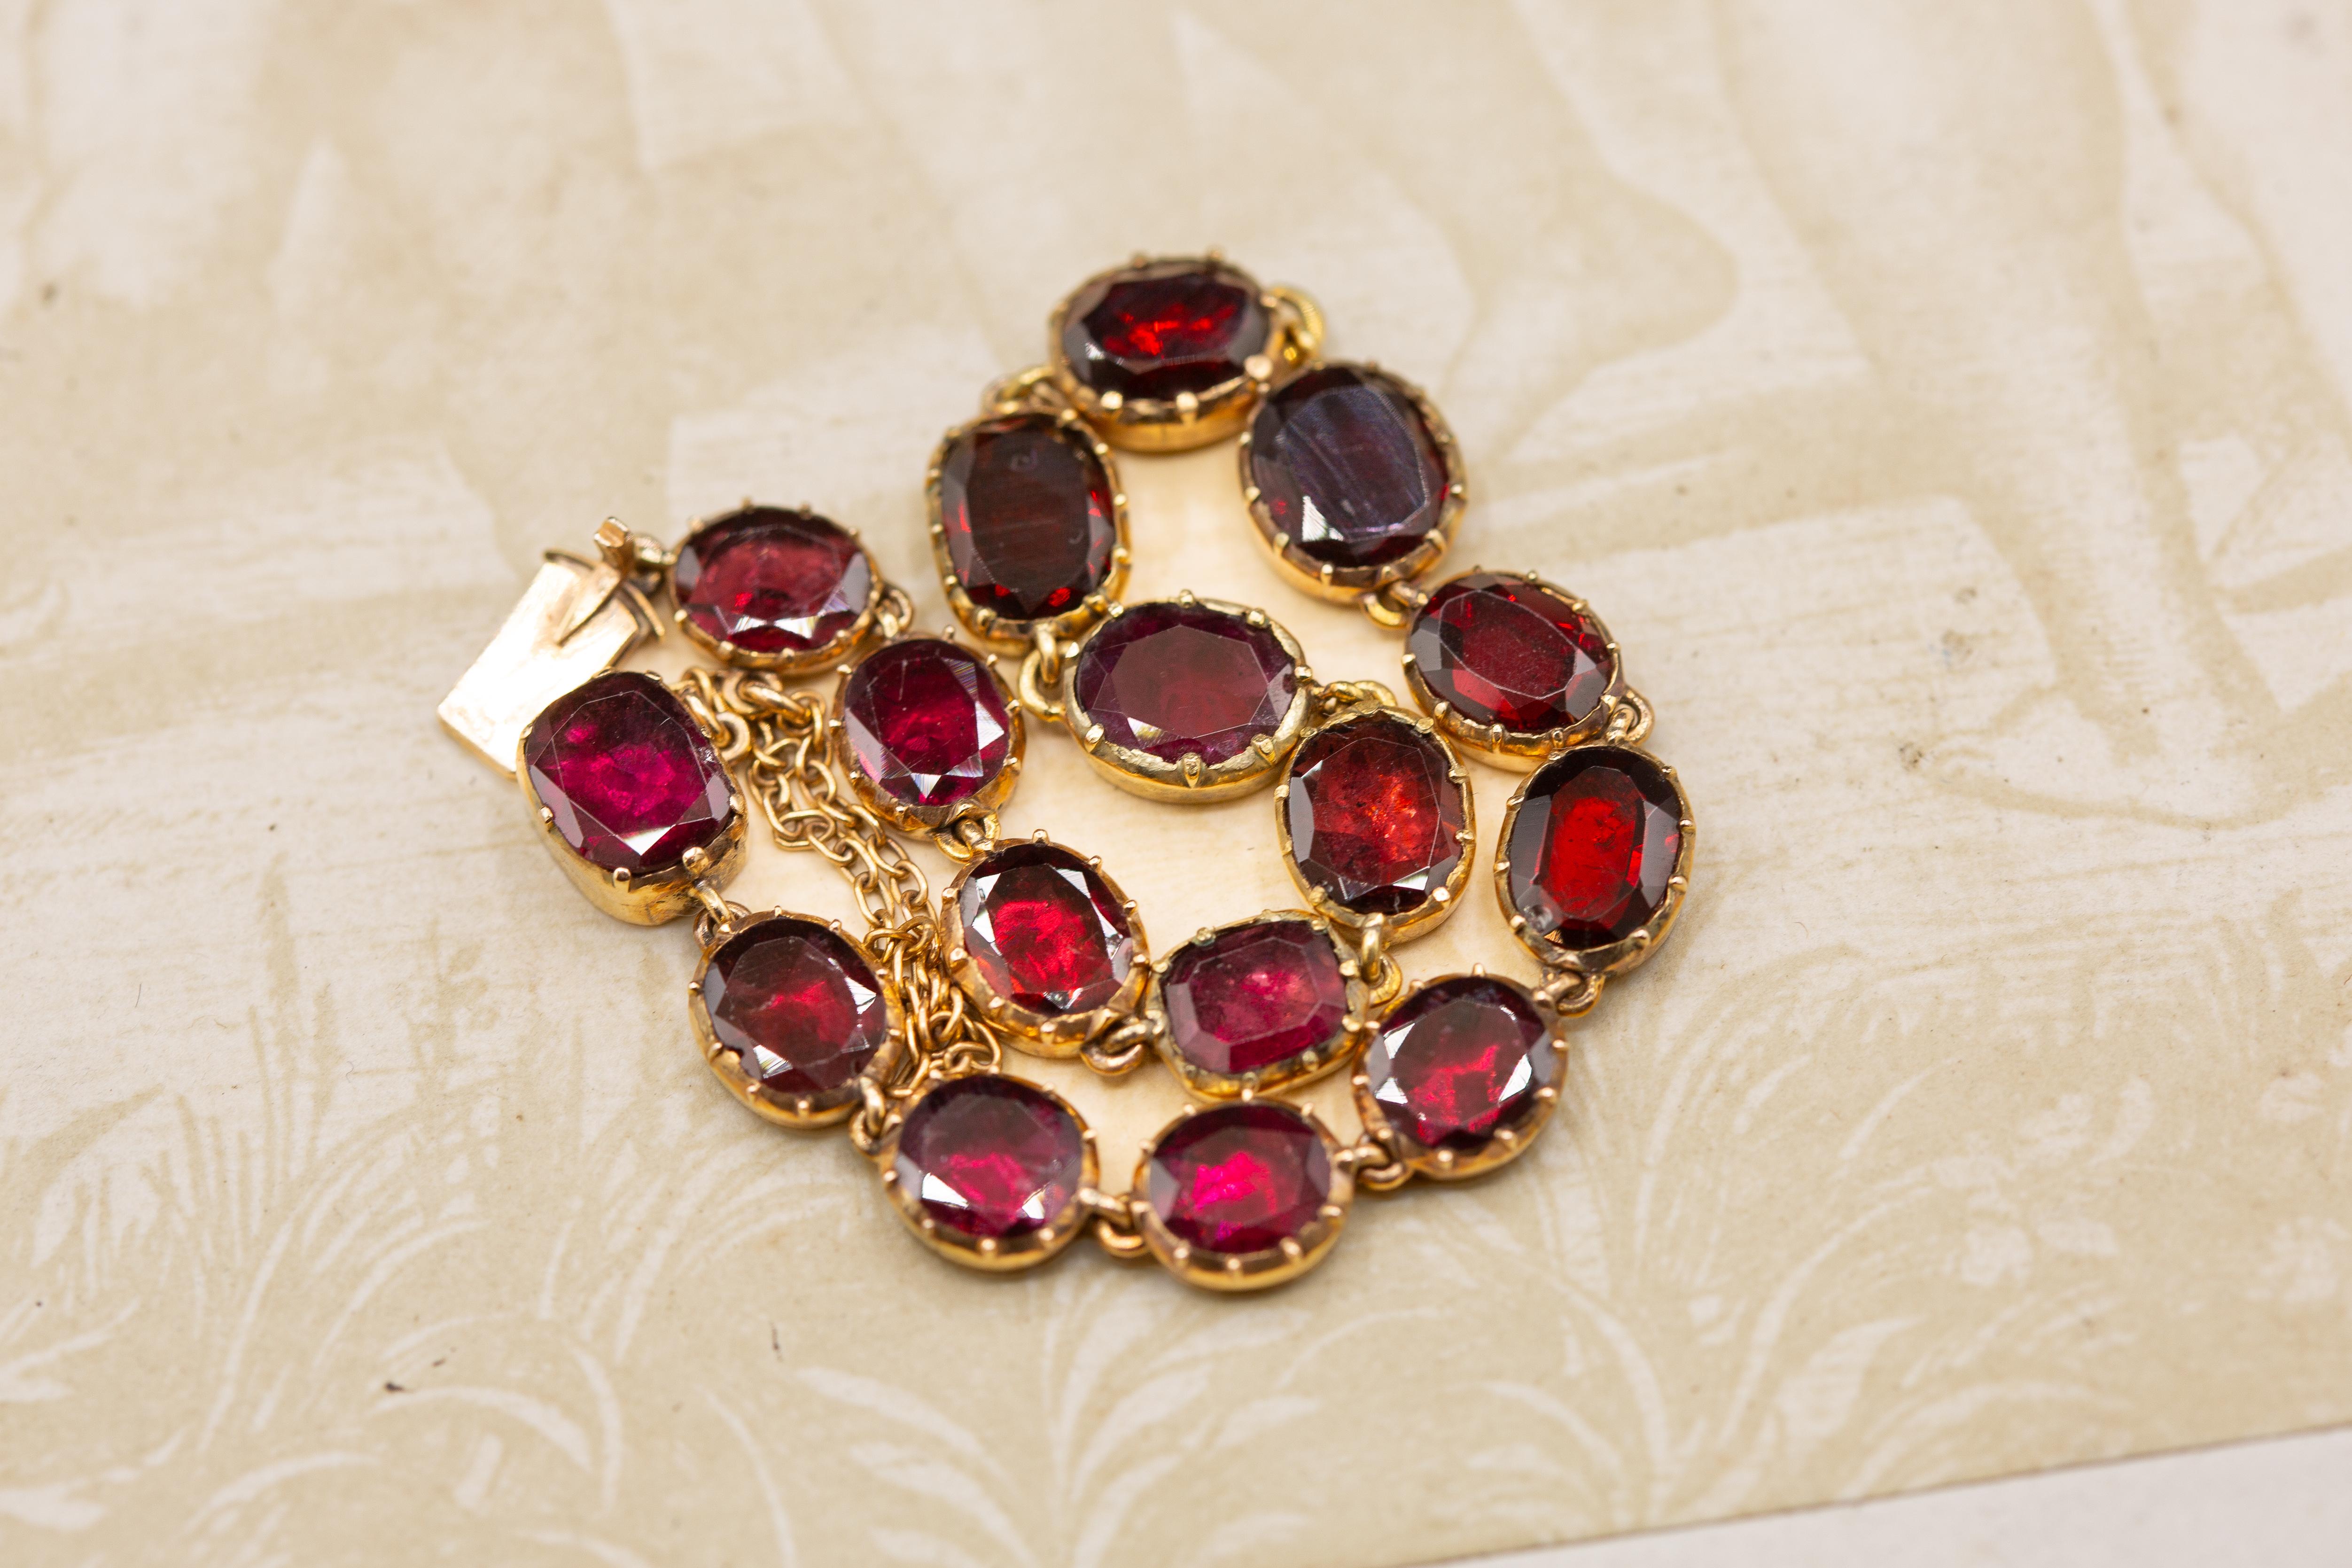 A gorgeous antique early 19th century glowing garnet rivière bracelet, made in Georgian England, circa 1800-1820. 

The bracelet is crafted in 15K gold and set with a total of 6.24cts flat-cut garnets, all of which are mounted in foiled and